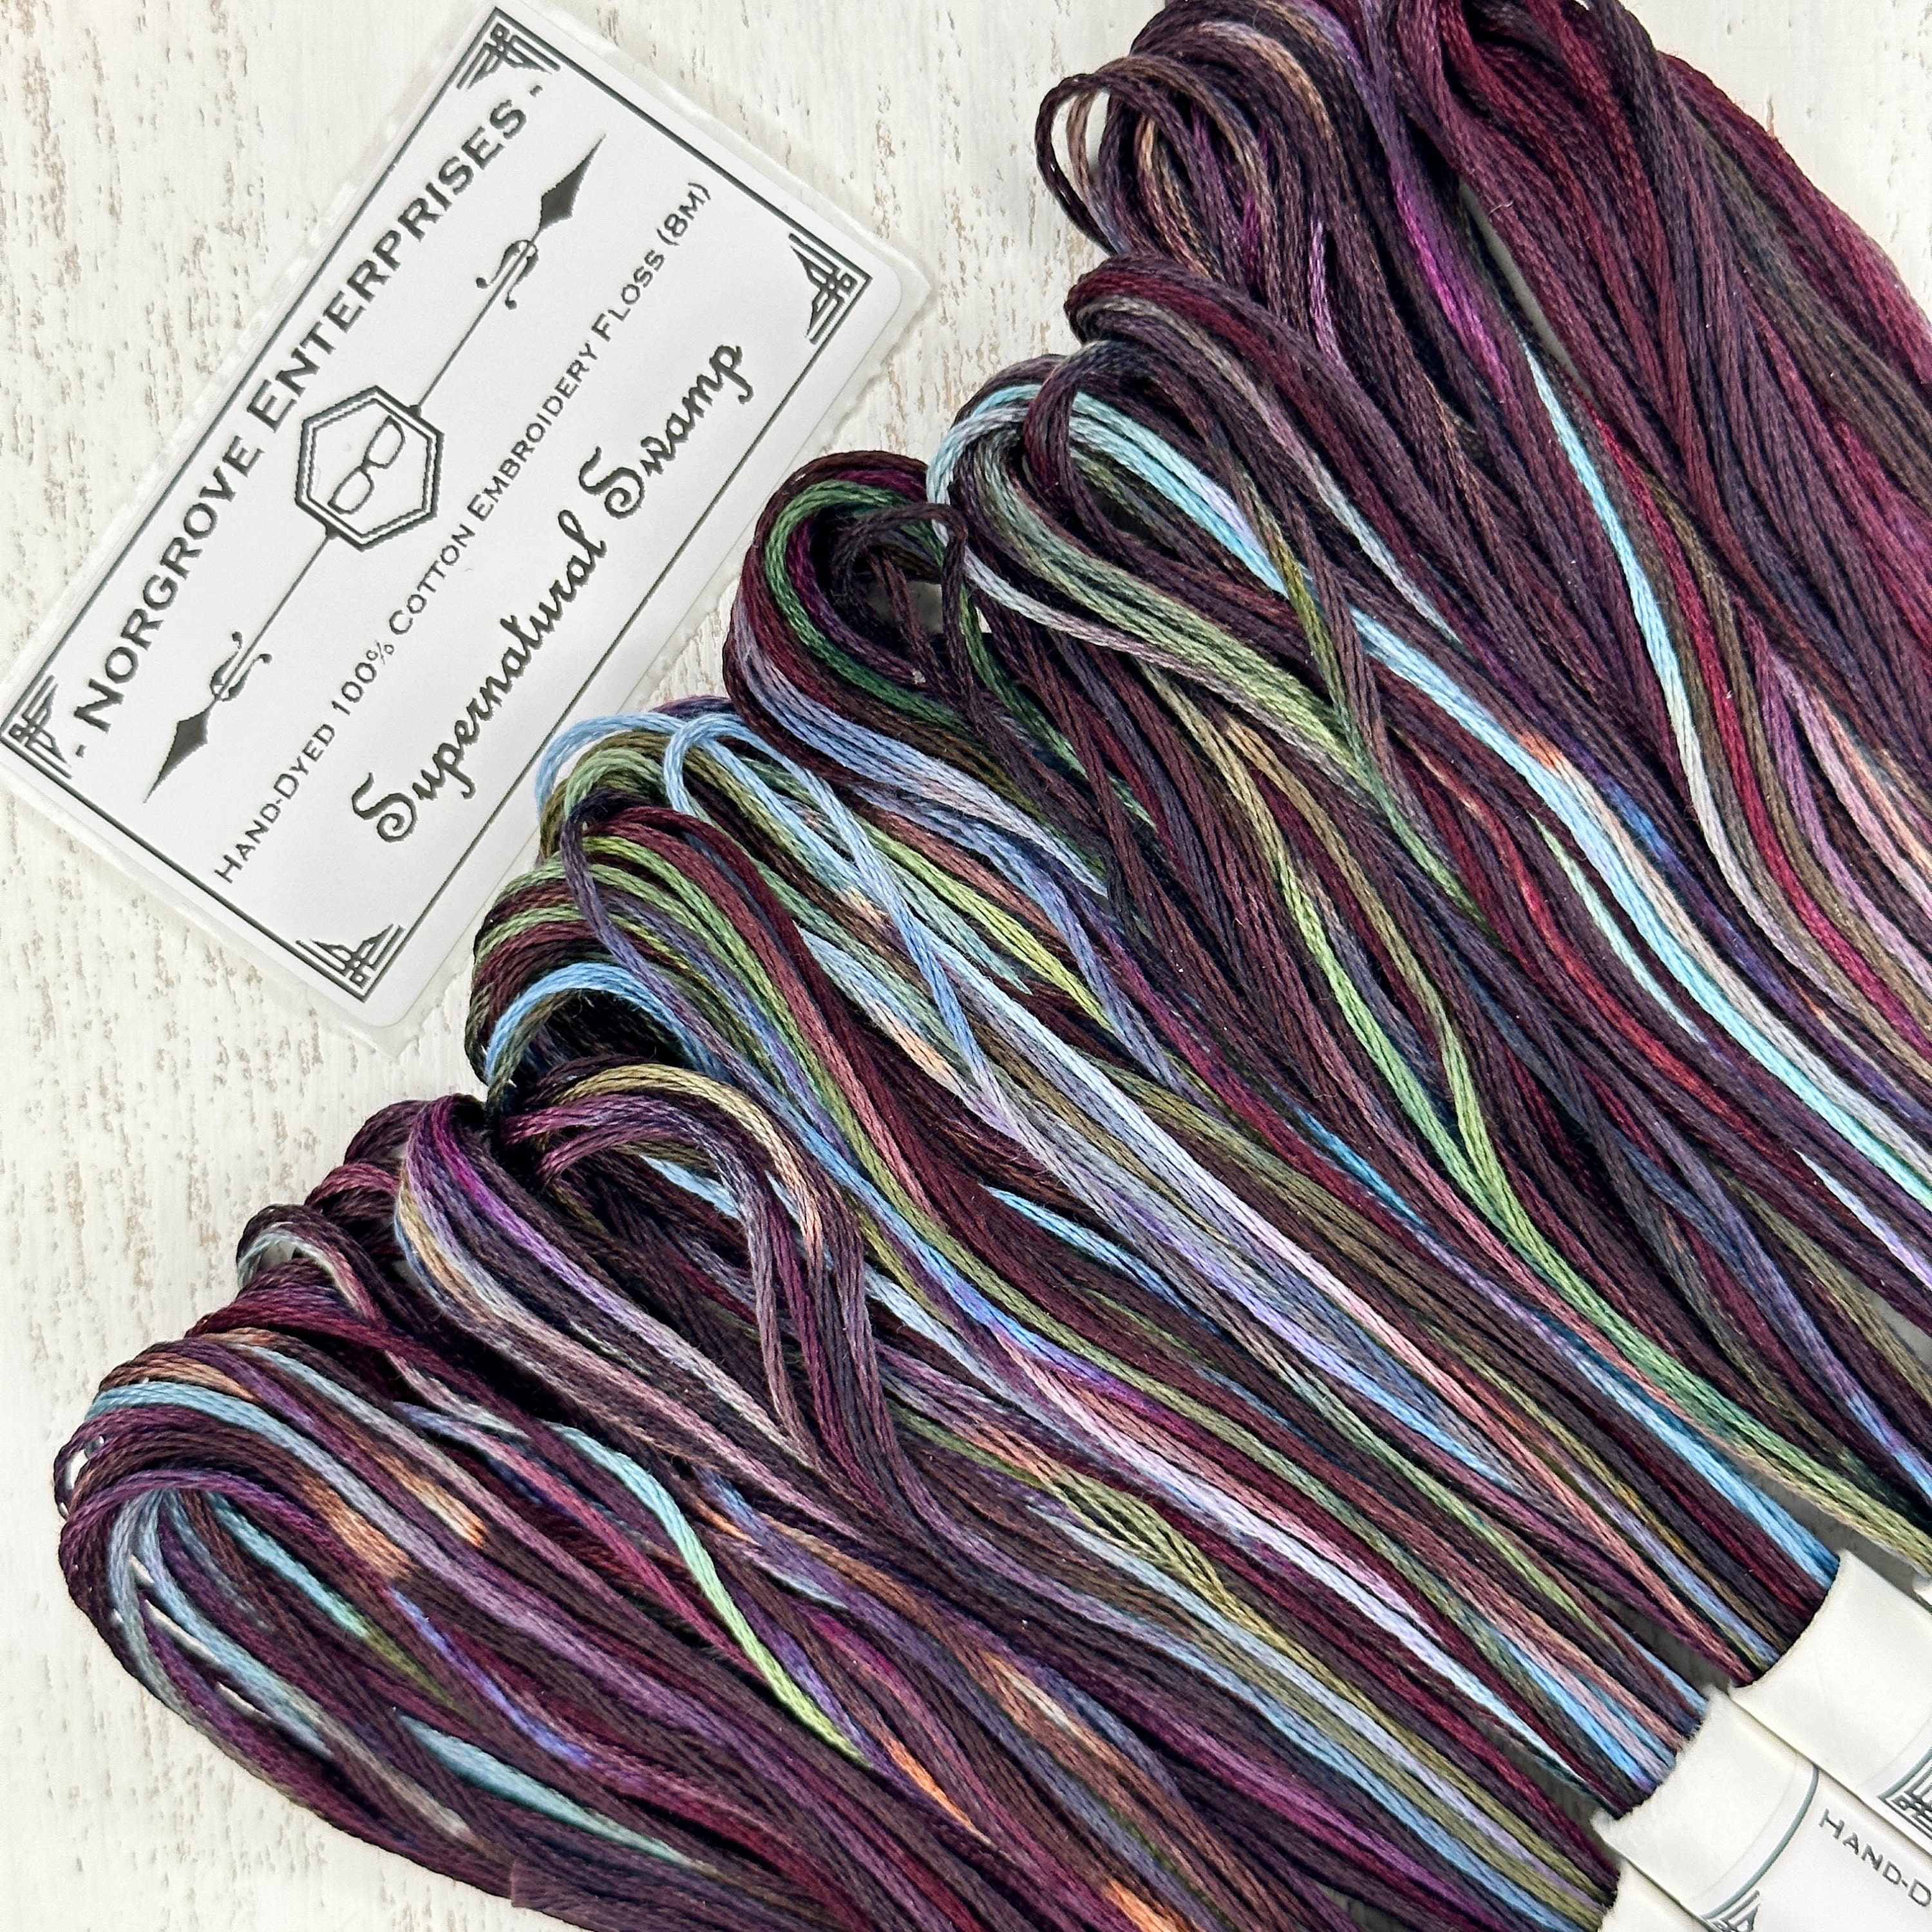 What are the DMC equivalents to the Pocket Skein colors?